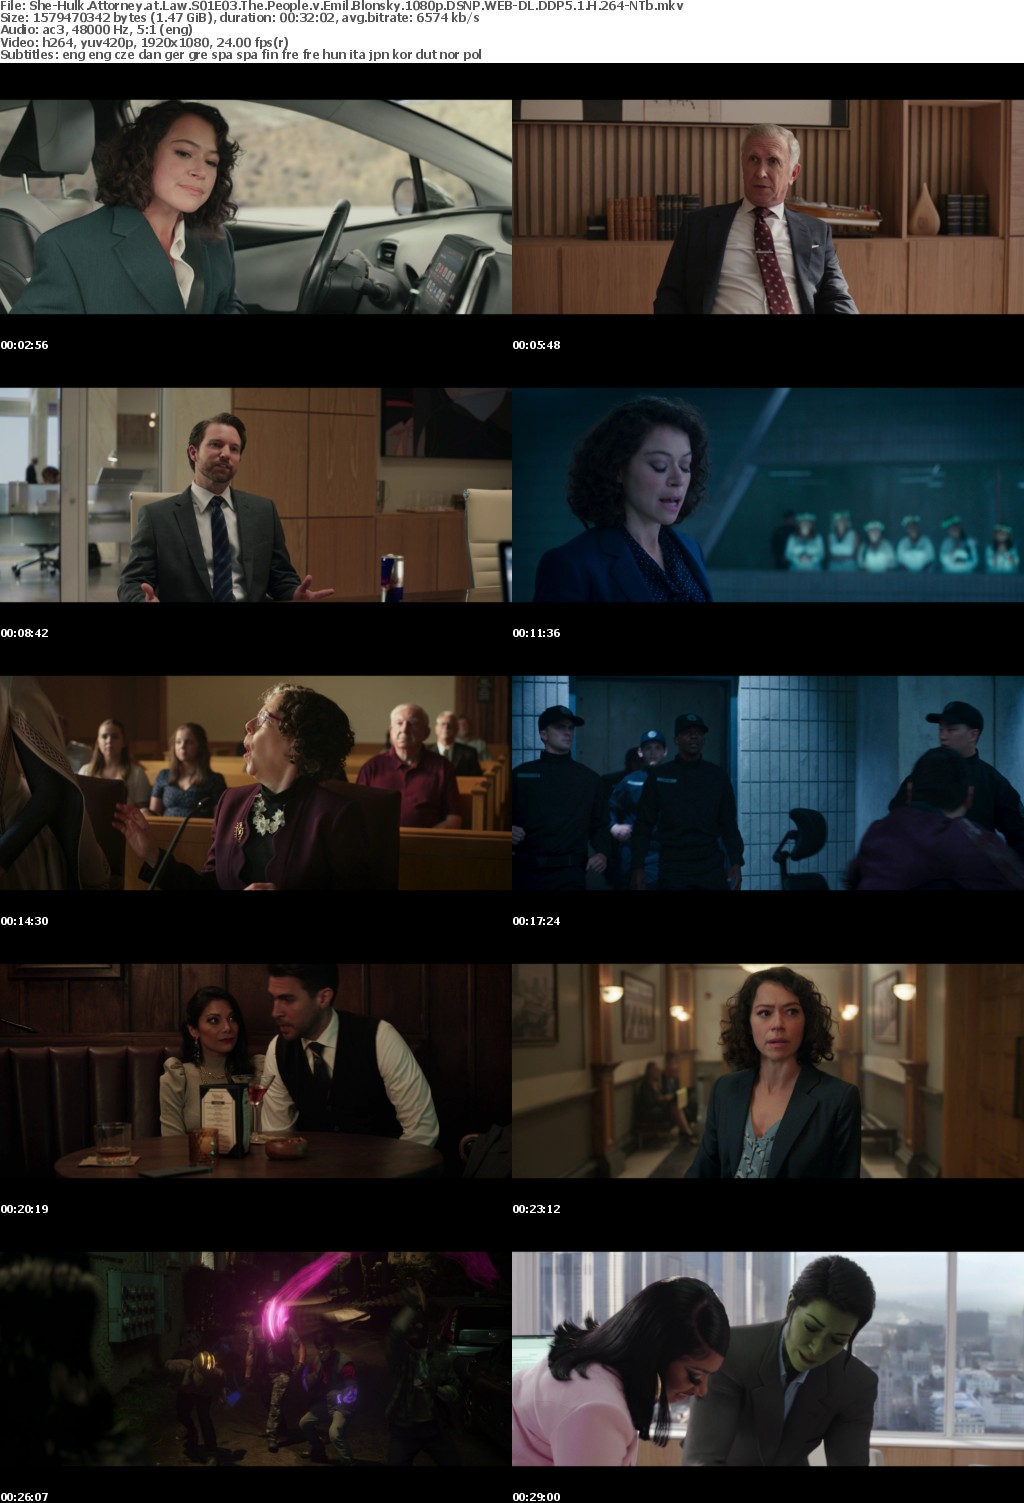 She-Hulk Attorney at Law S01E03 The People v Emil Blonsky 1080p DSNP WEBRip DDP5 1 x264-NTb